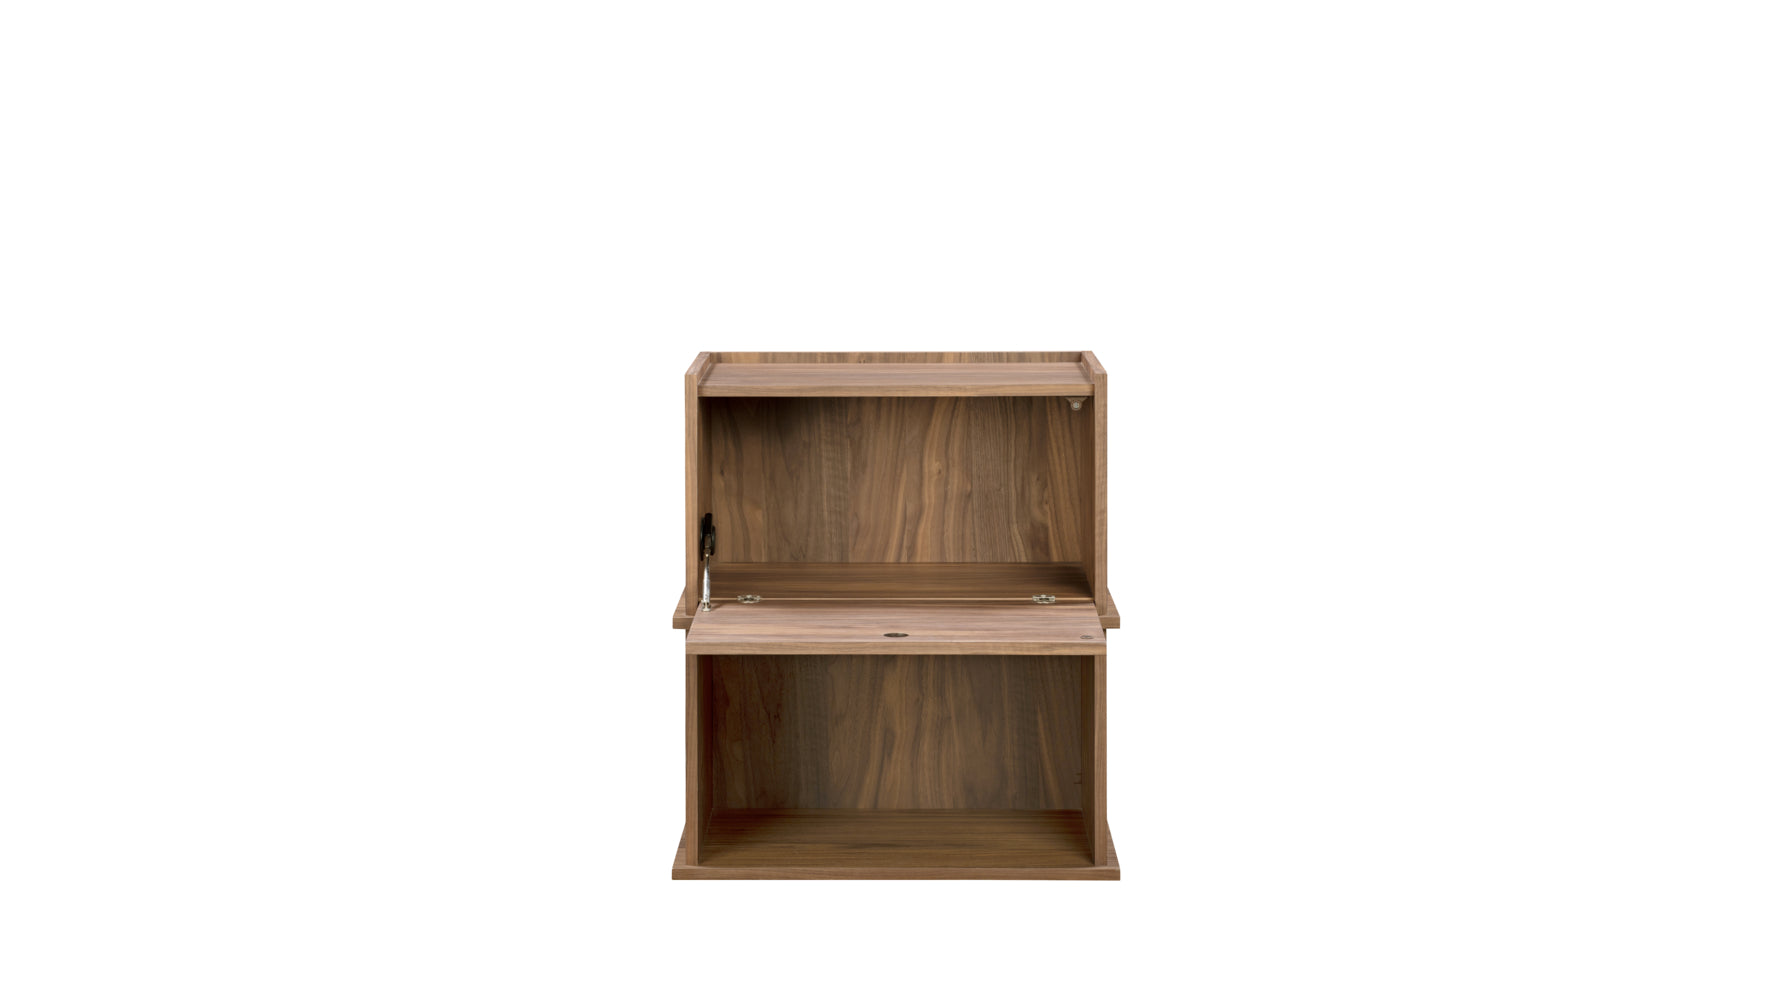 Keep Stacking Storage System 2-Piece, Open and Closed, Walnut - Image 8